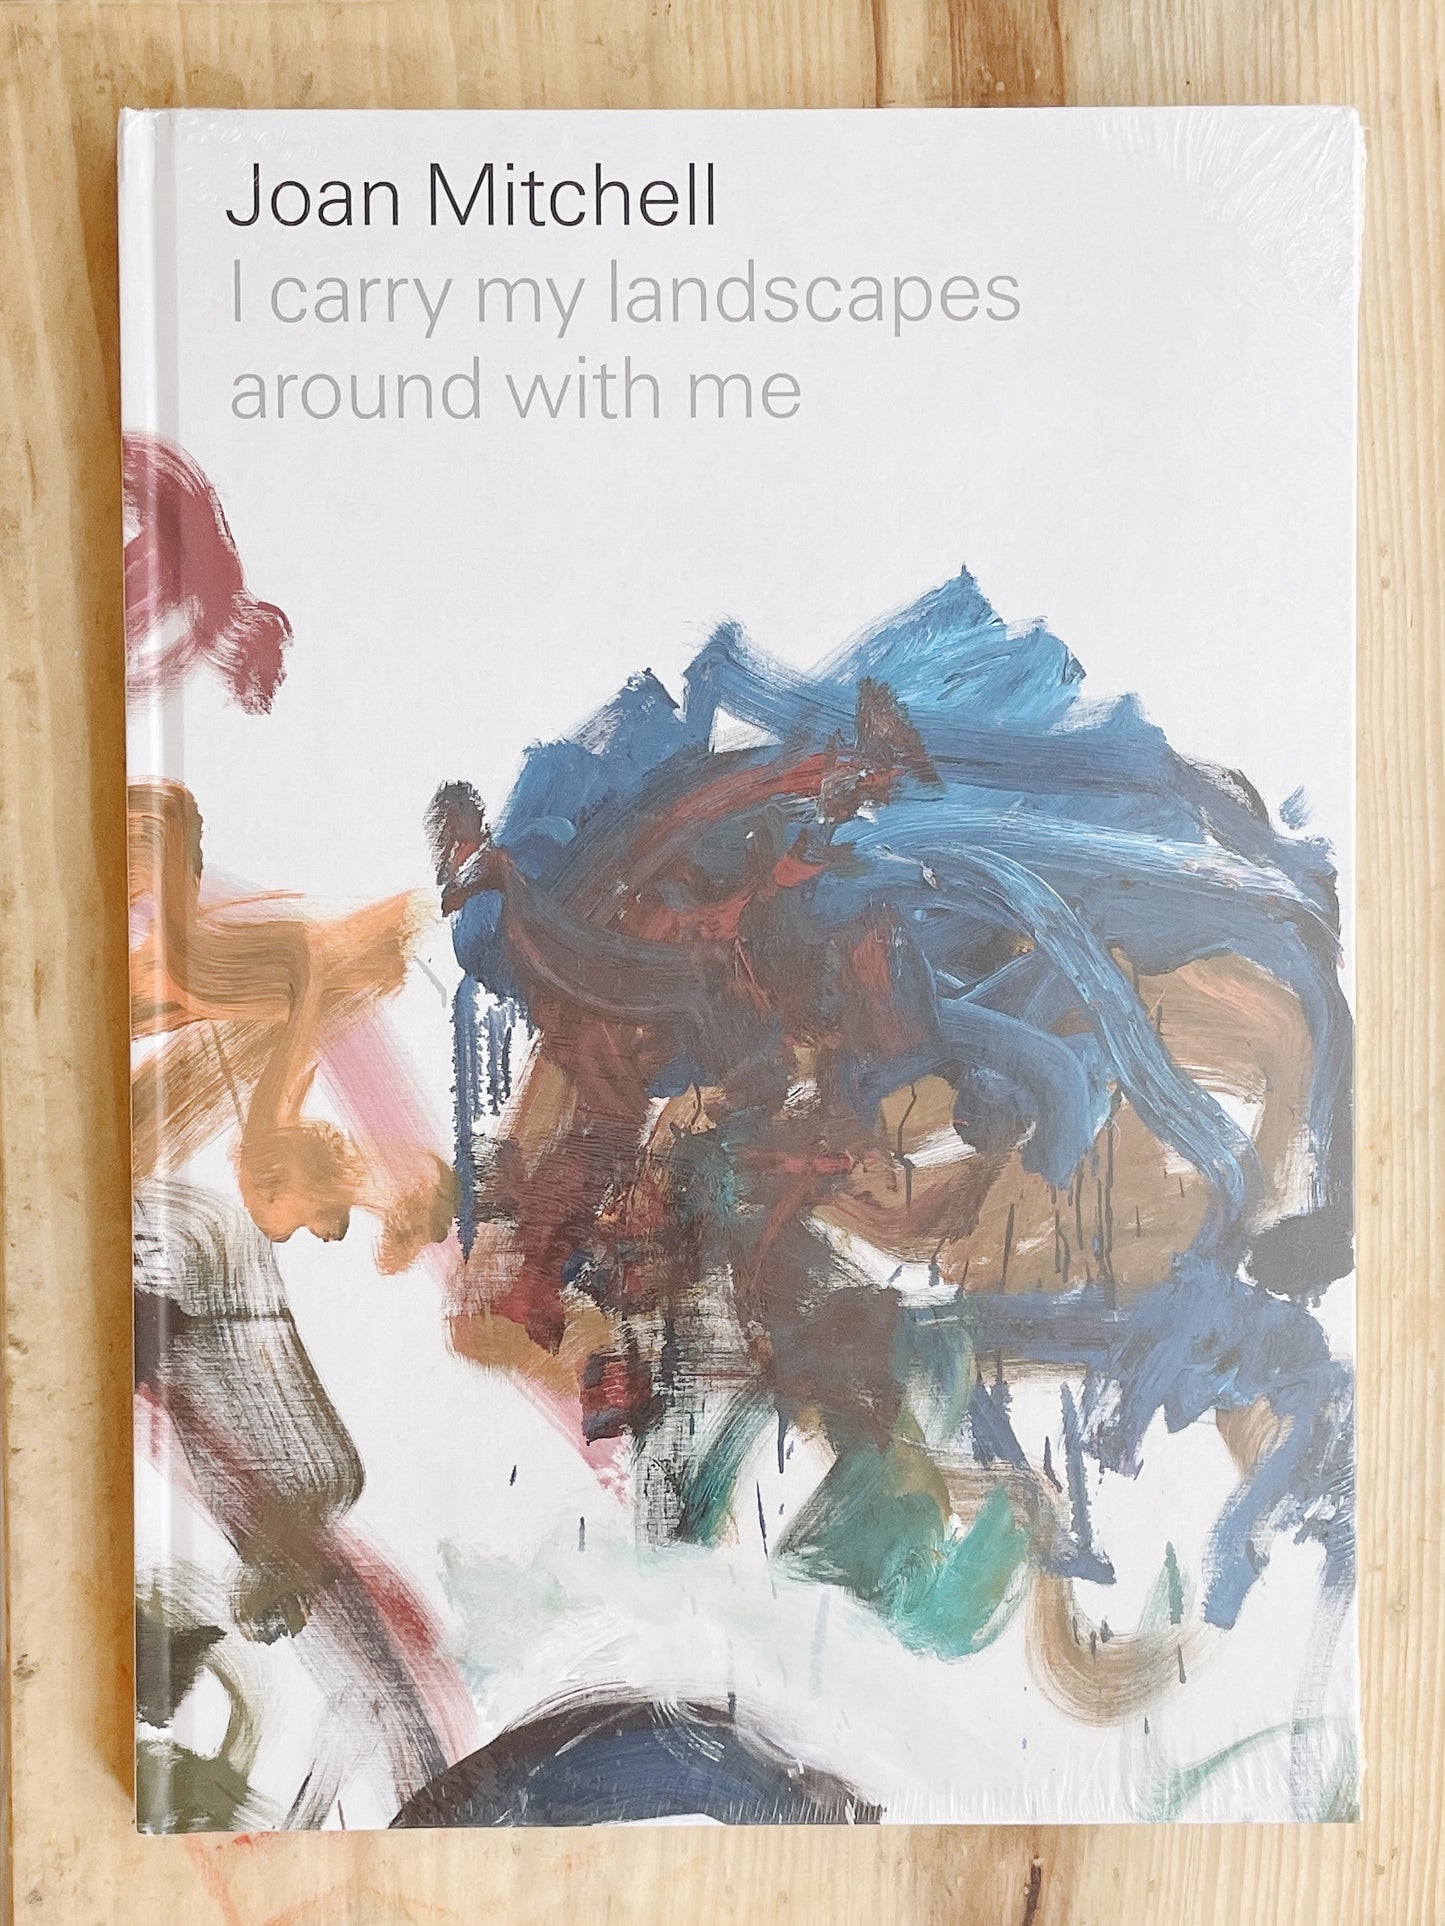 Joan Mitchell - I carry my landscapes around with me